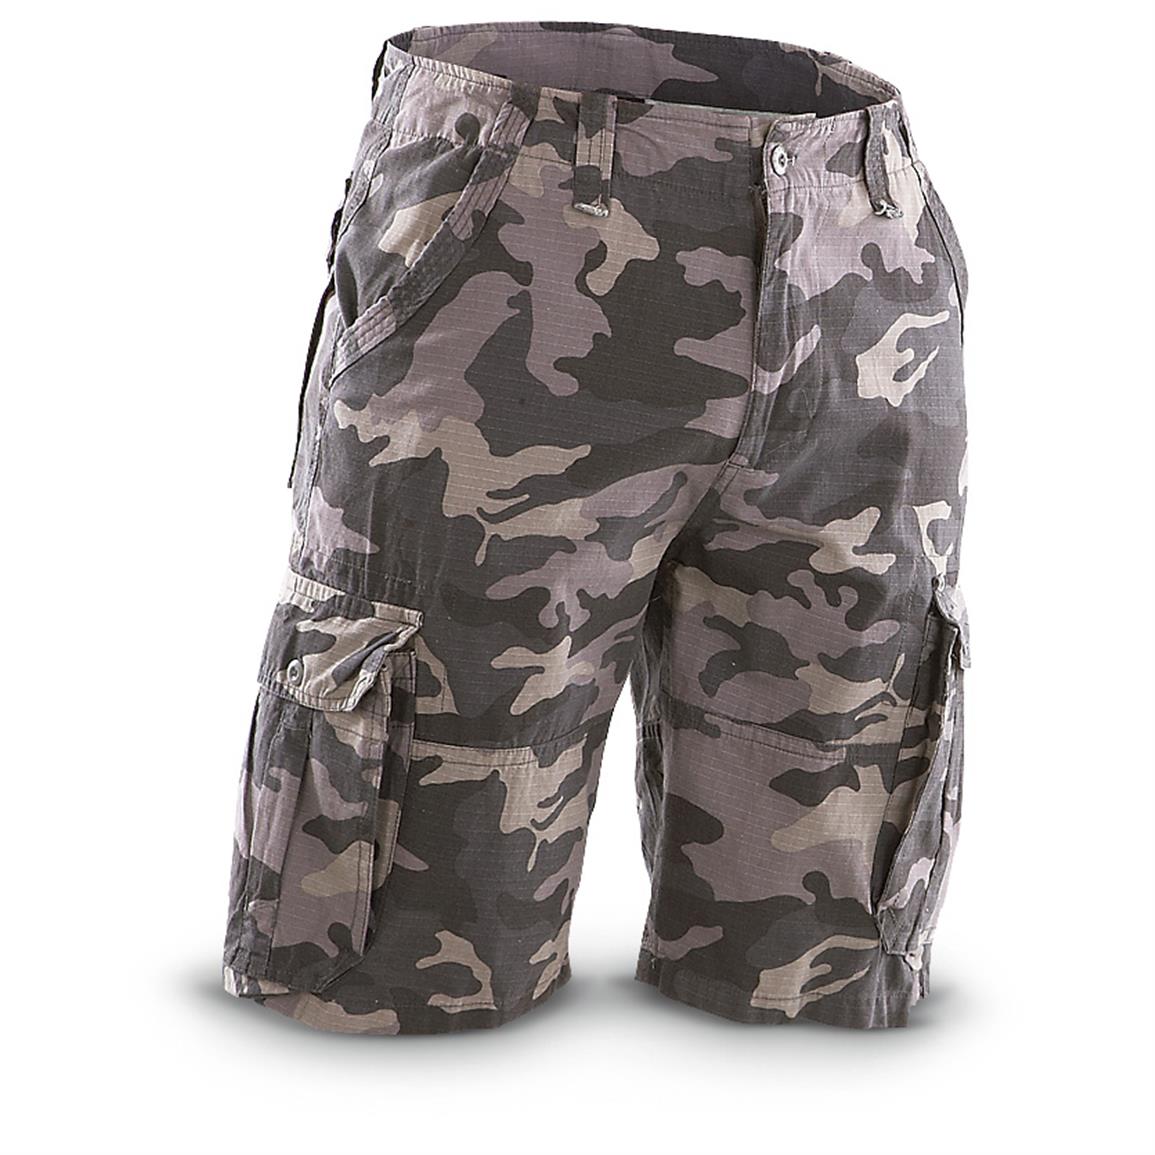 Guide Gear Ripstop Cargo Shorts - 621465, Shorts at Sportsman's Guide